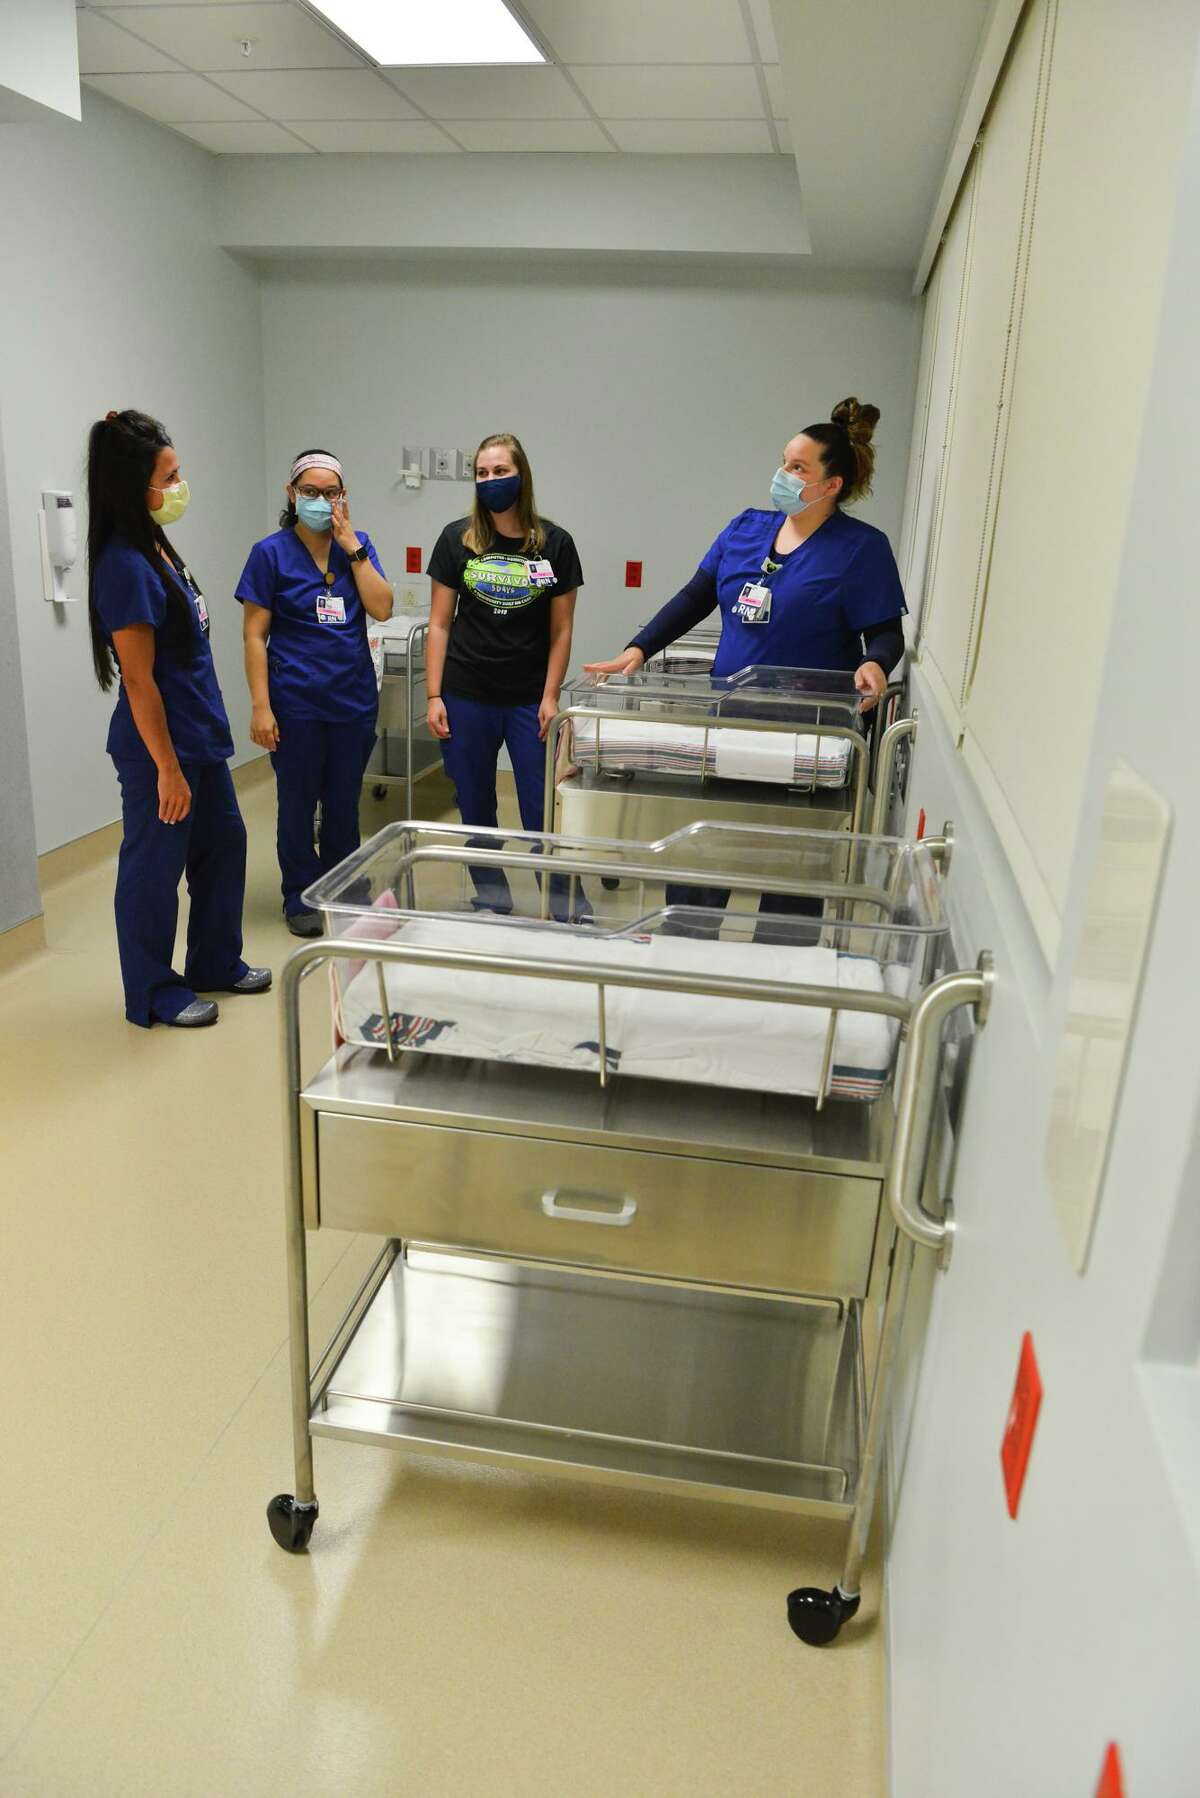 Women's Services nurses Rachel Lowry, Charissa Morrison, Kylie Voigt and Megan Trejo discuss equipment during a tour of the newly upgraded Women's Services Unit at Baptist Mission Trail Hospital on July 27, 2021.